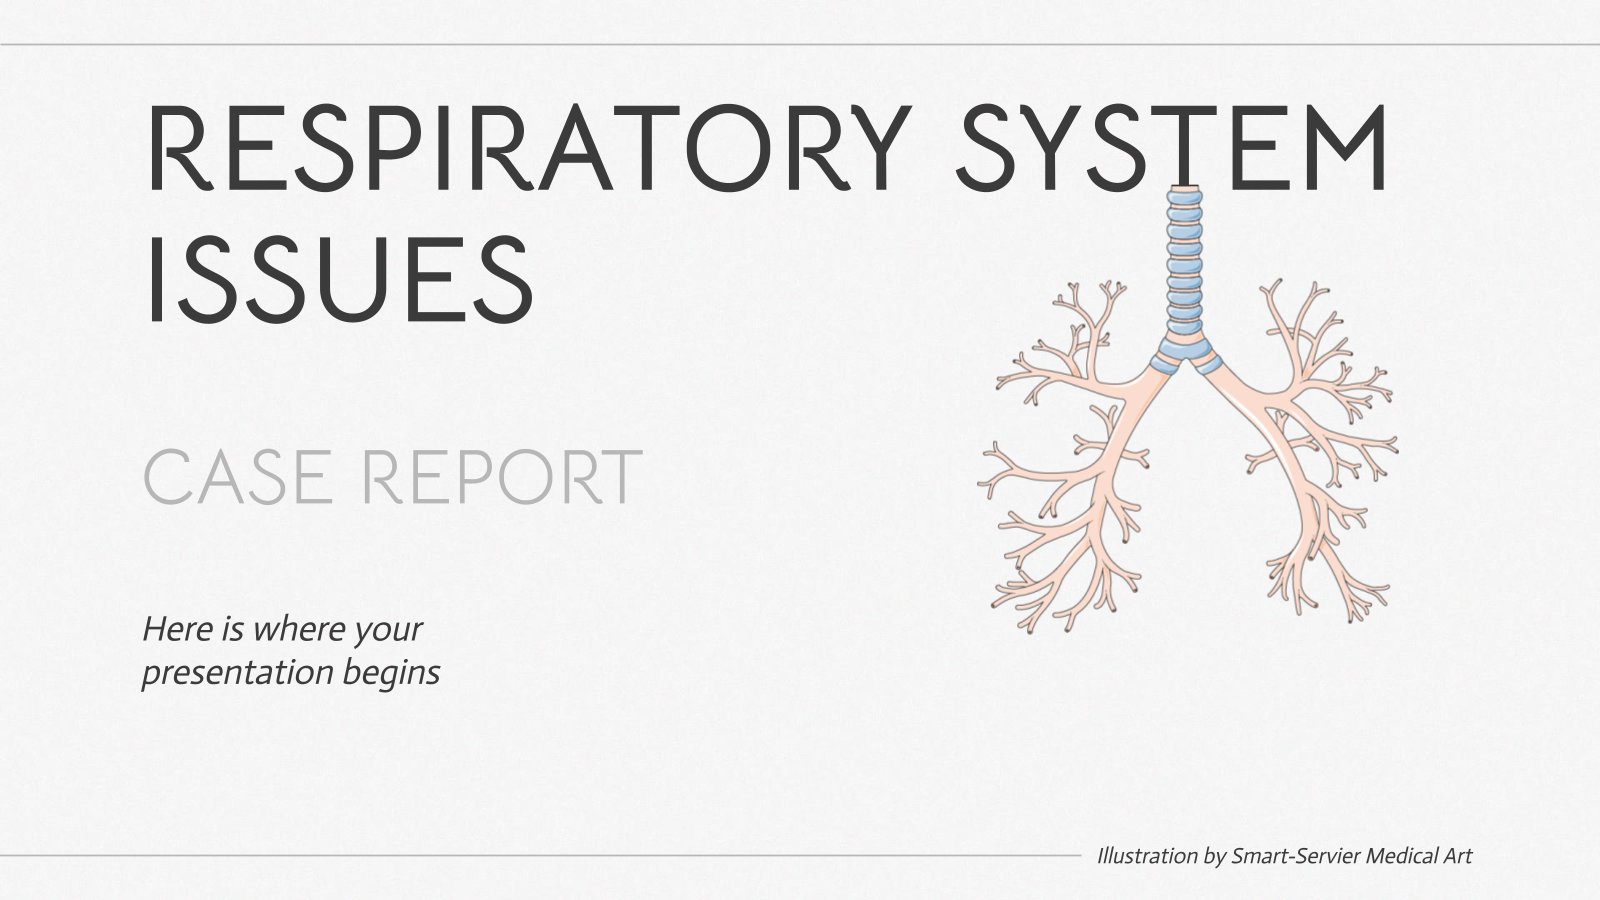 Respiratory System Issues Case Report presentation template 